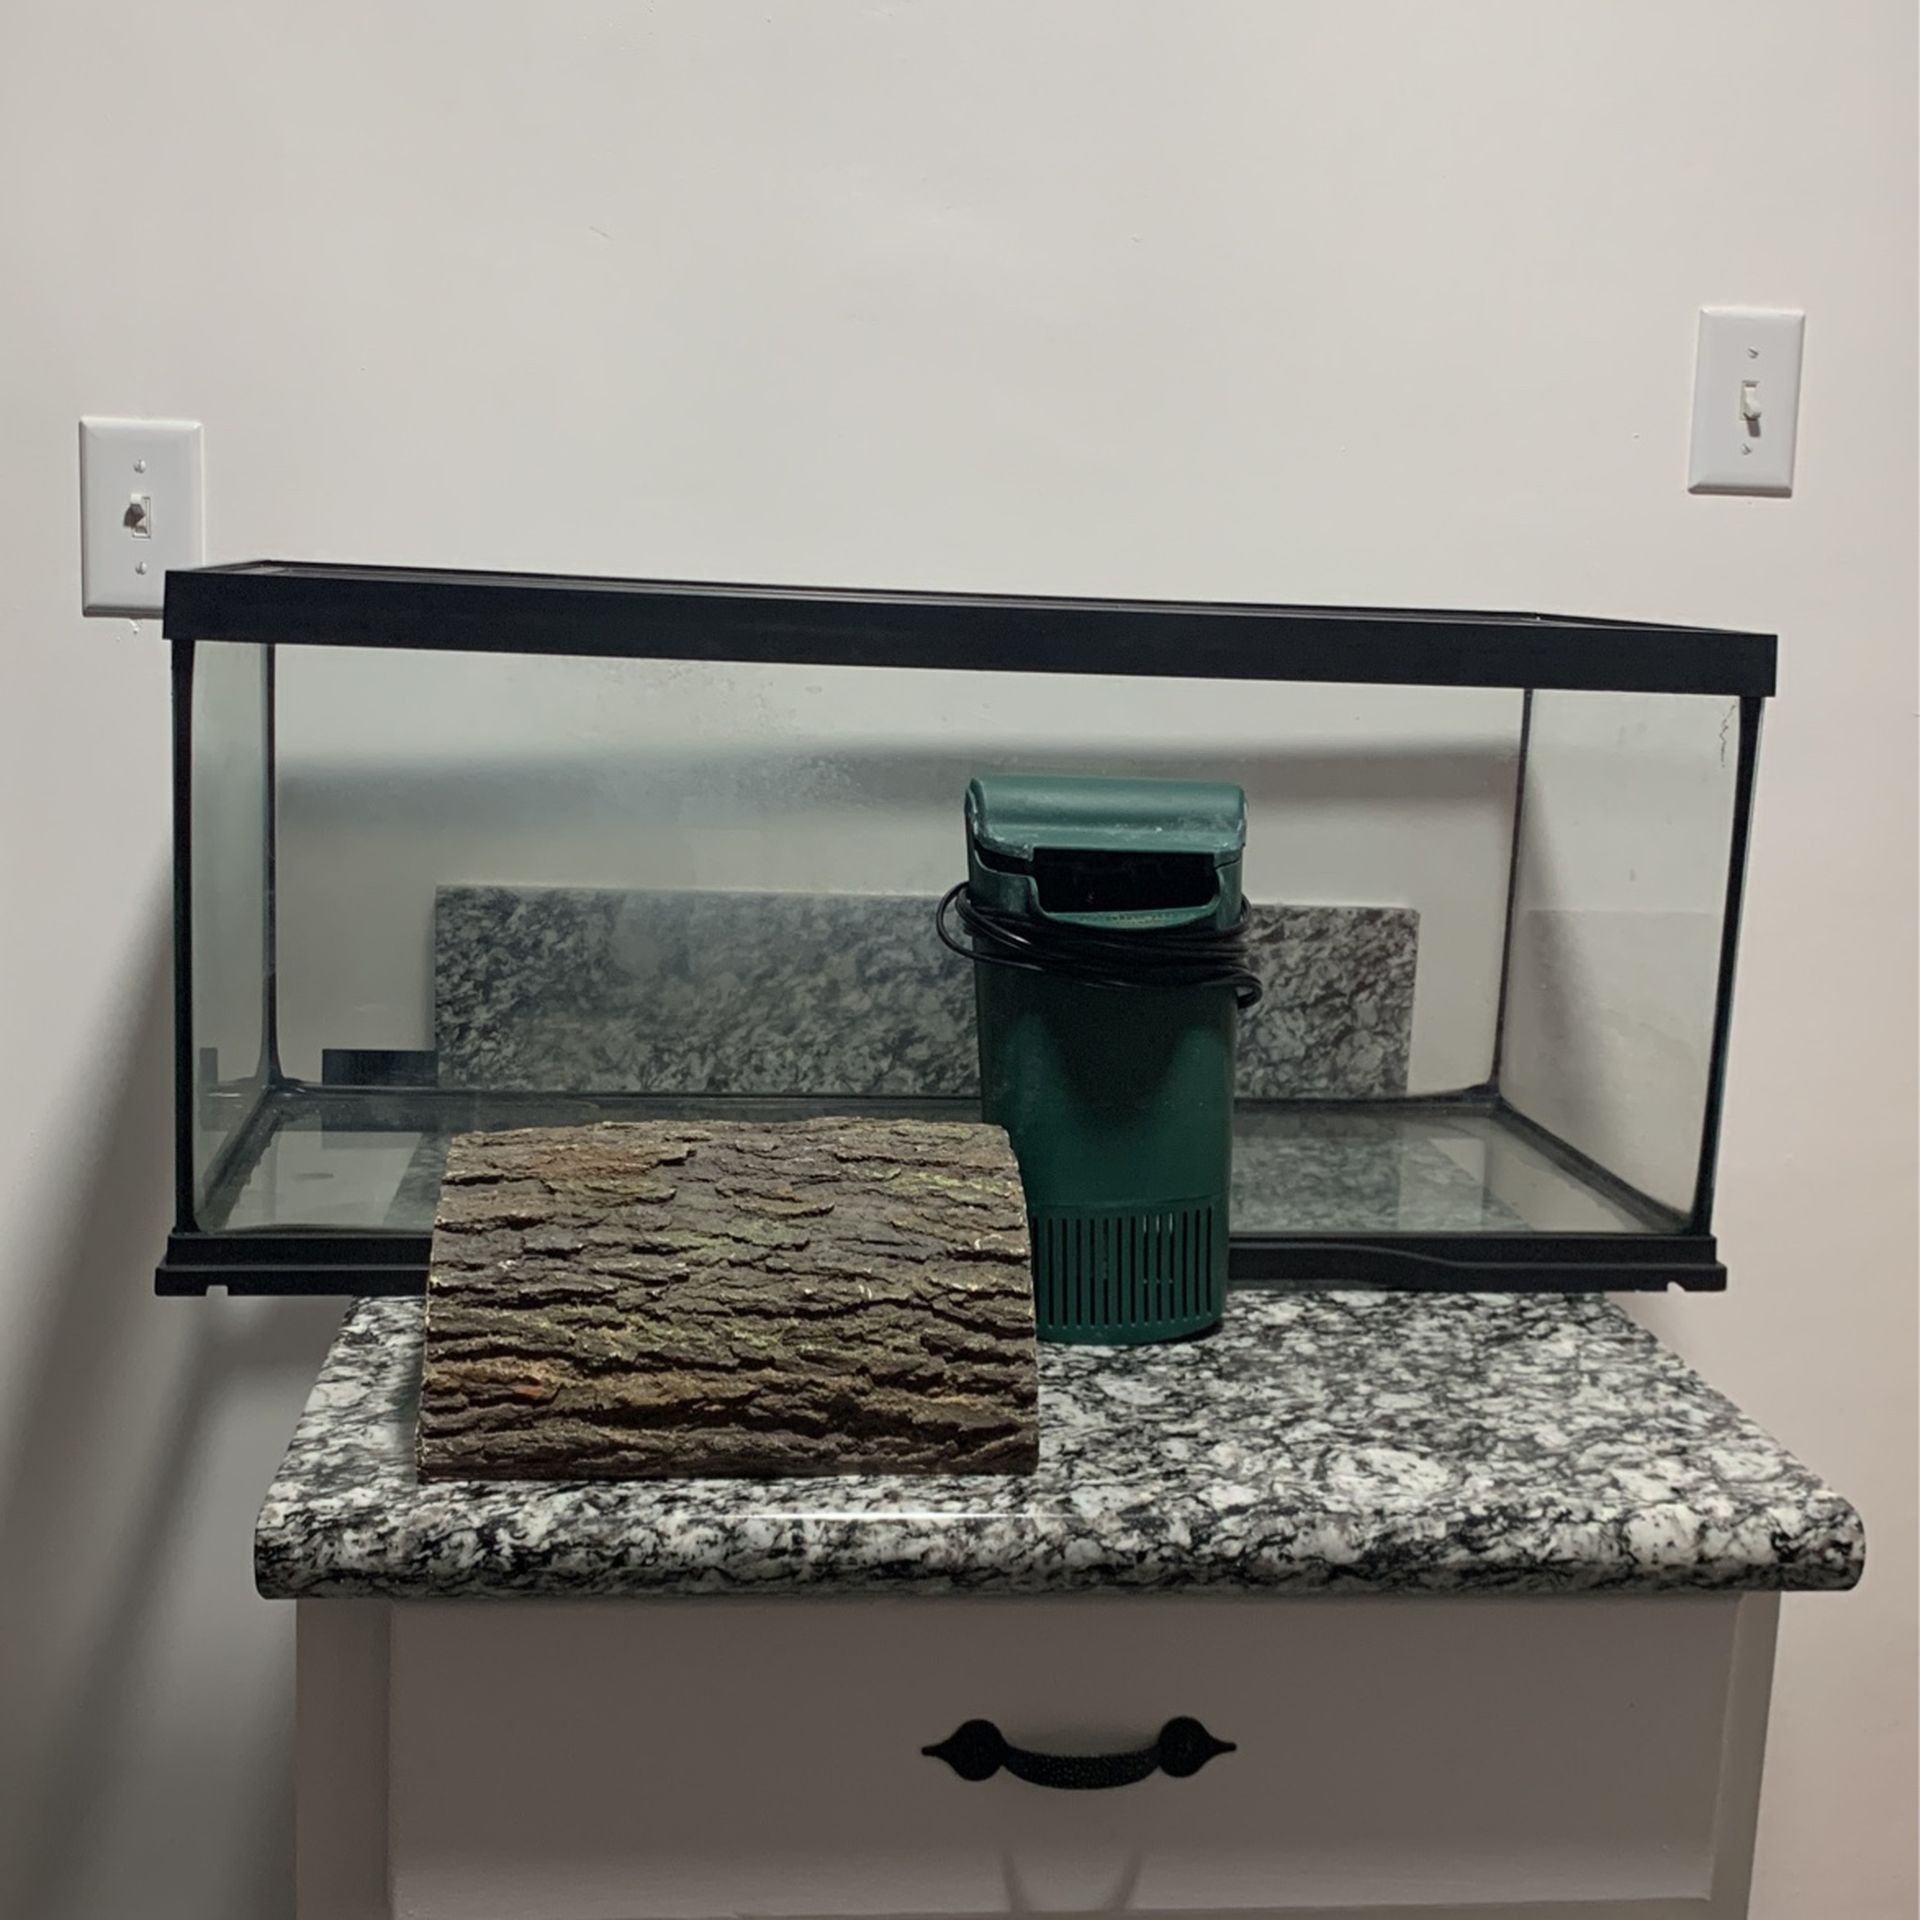 Aquatic Turtle Tank With Basking Log And Water Filter